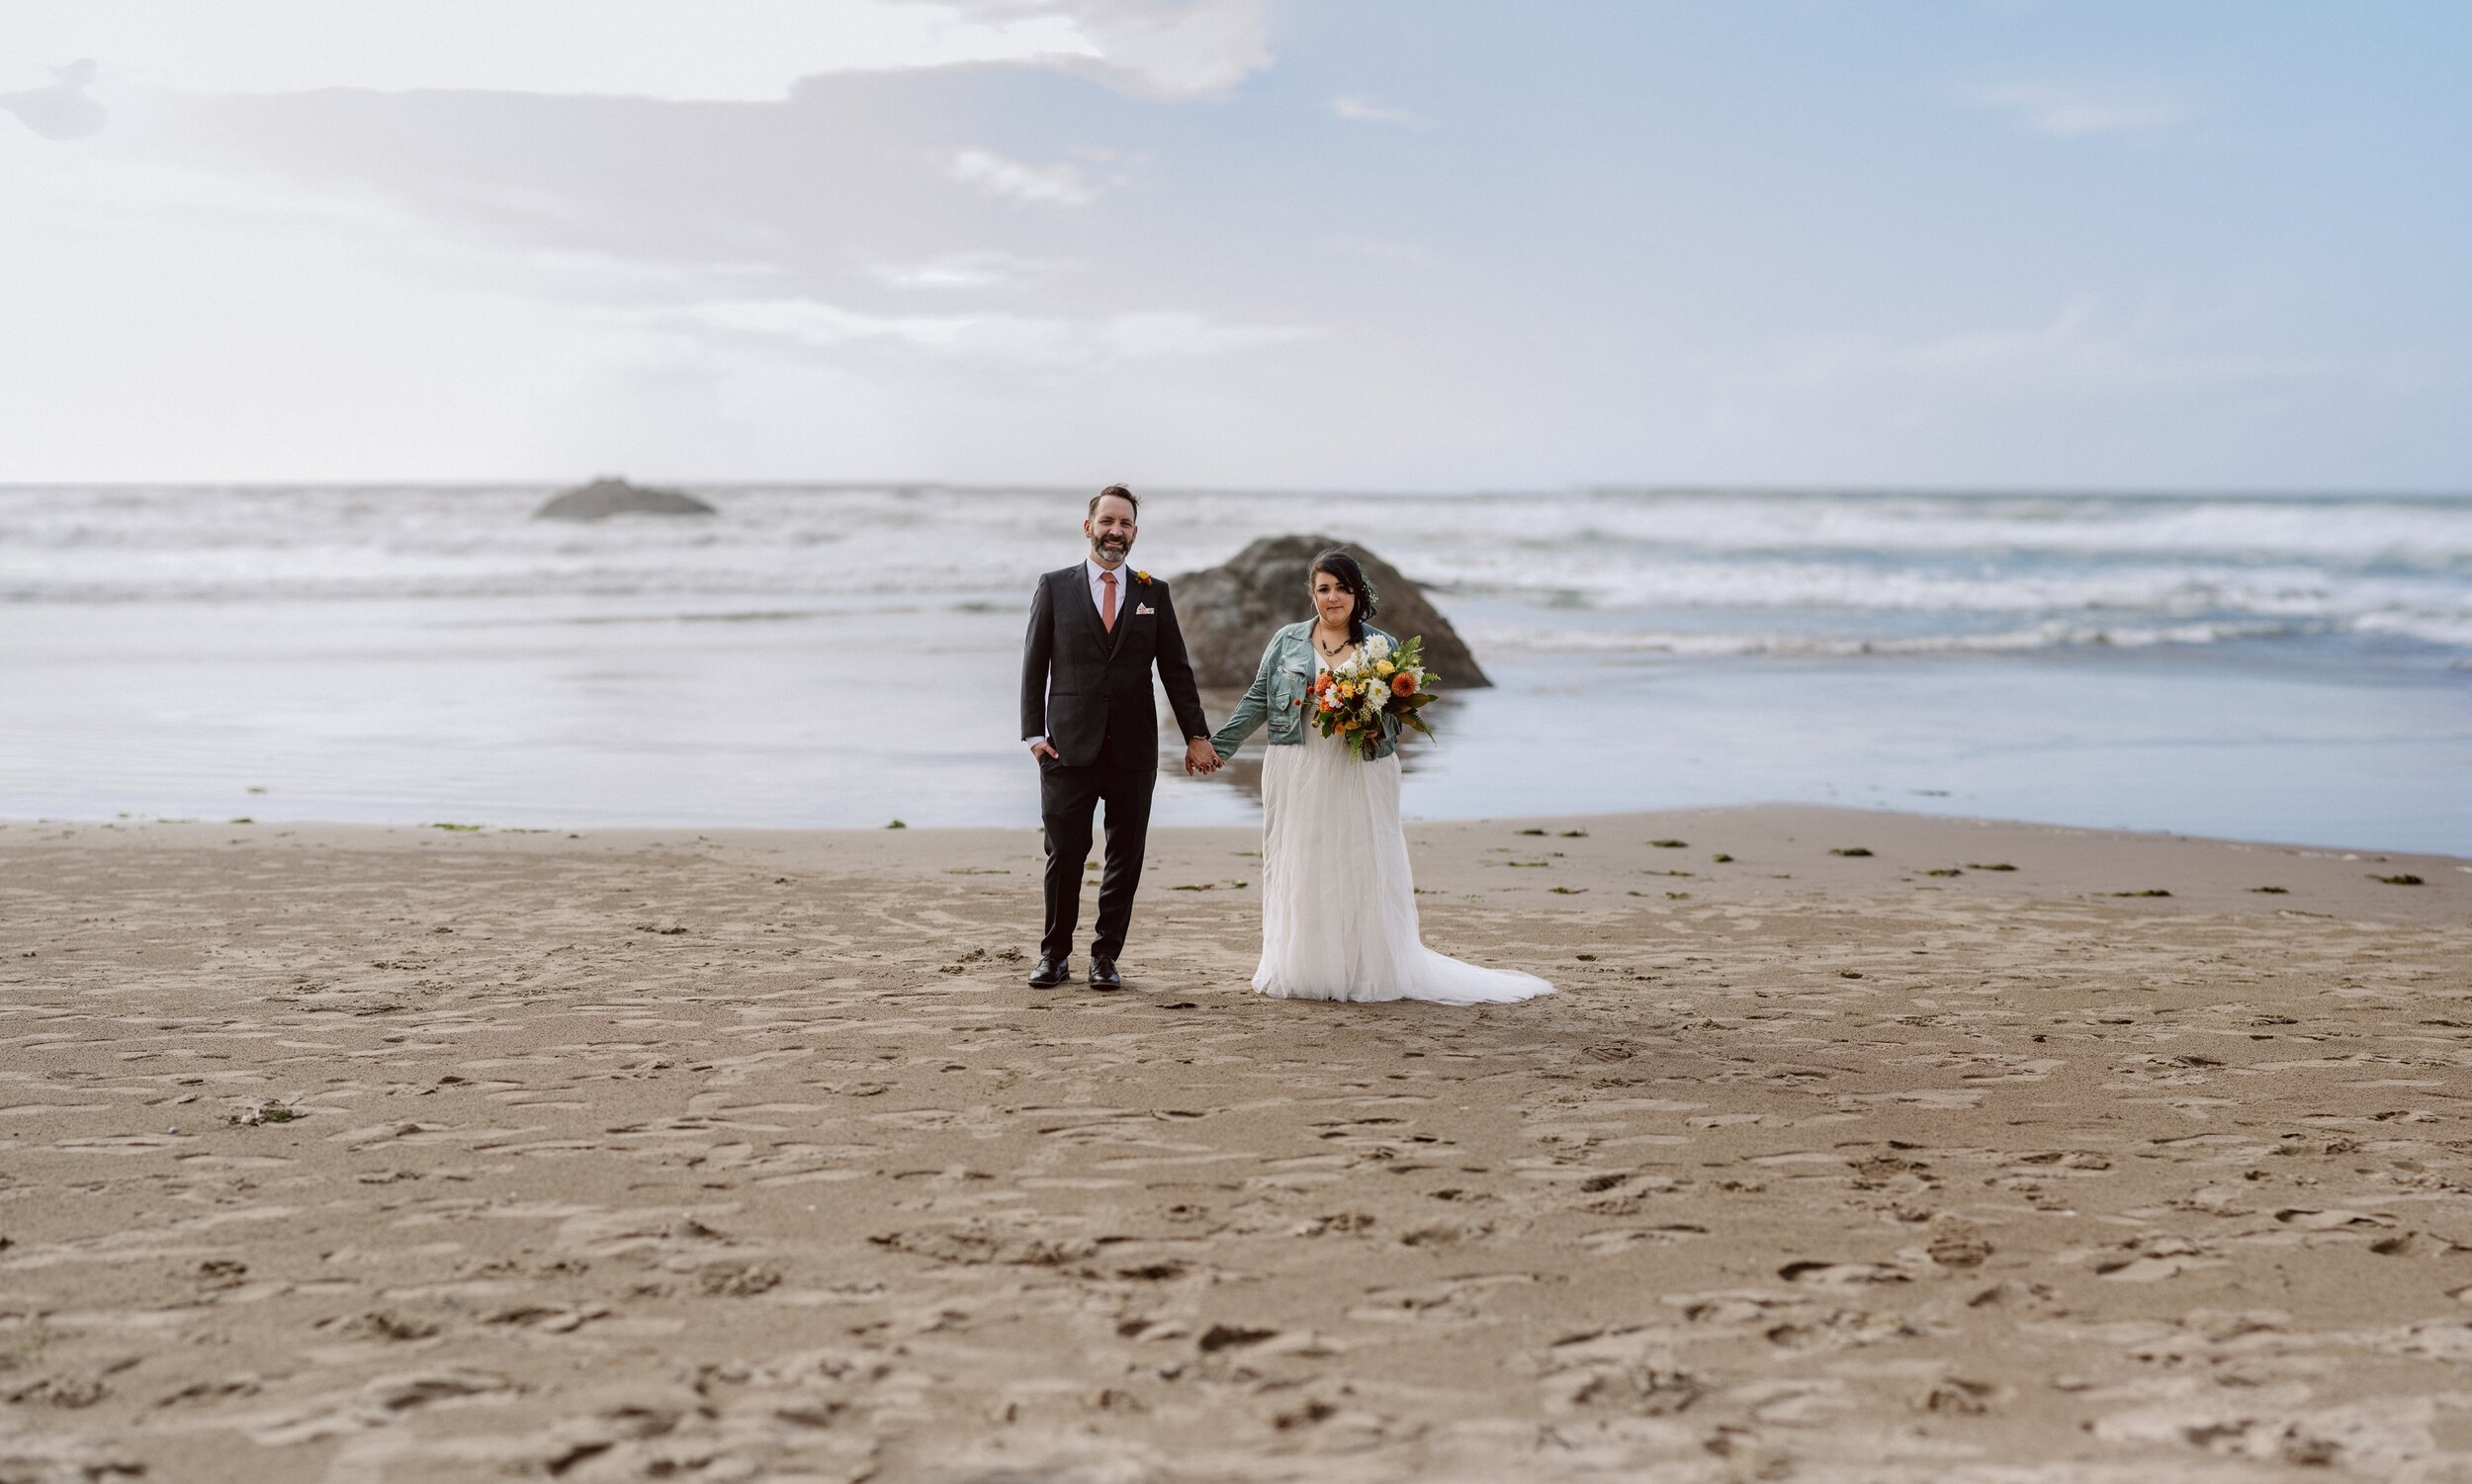 Panorama of Hug Point beach with a bride and groom in the center holding hands, the bride holding a large fall-colored bouquet